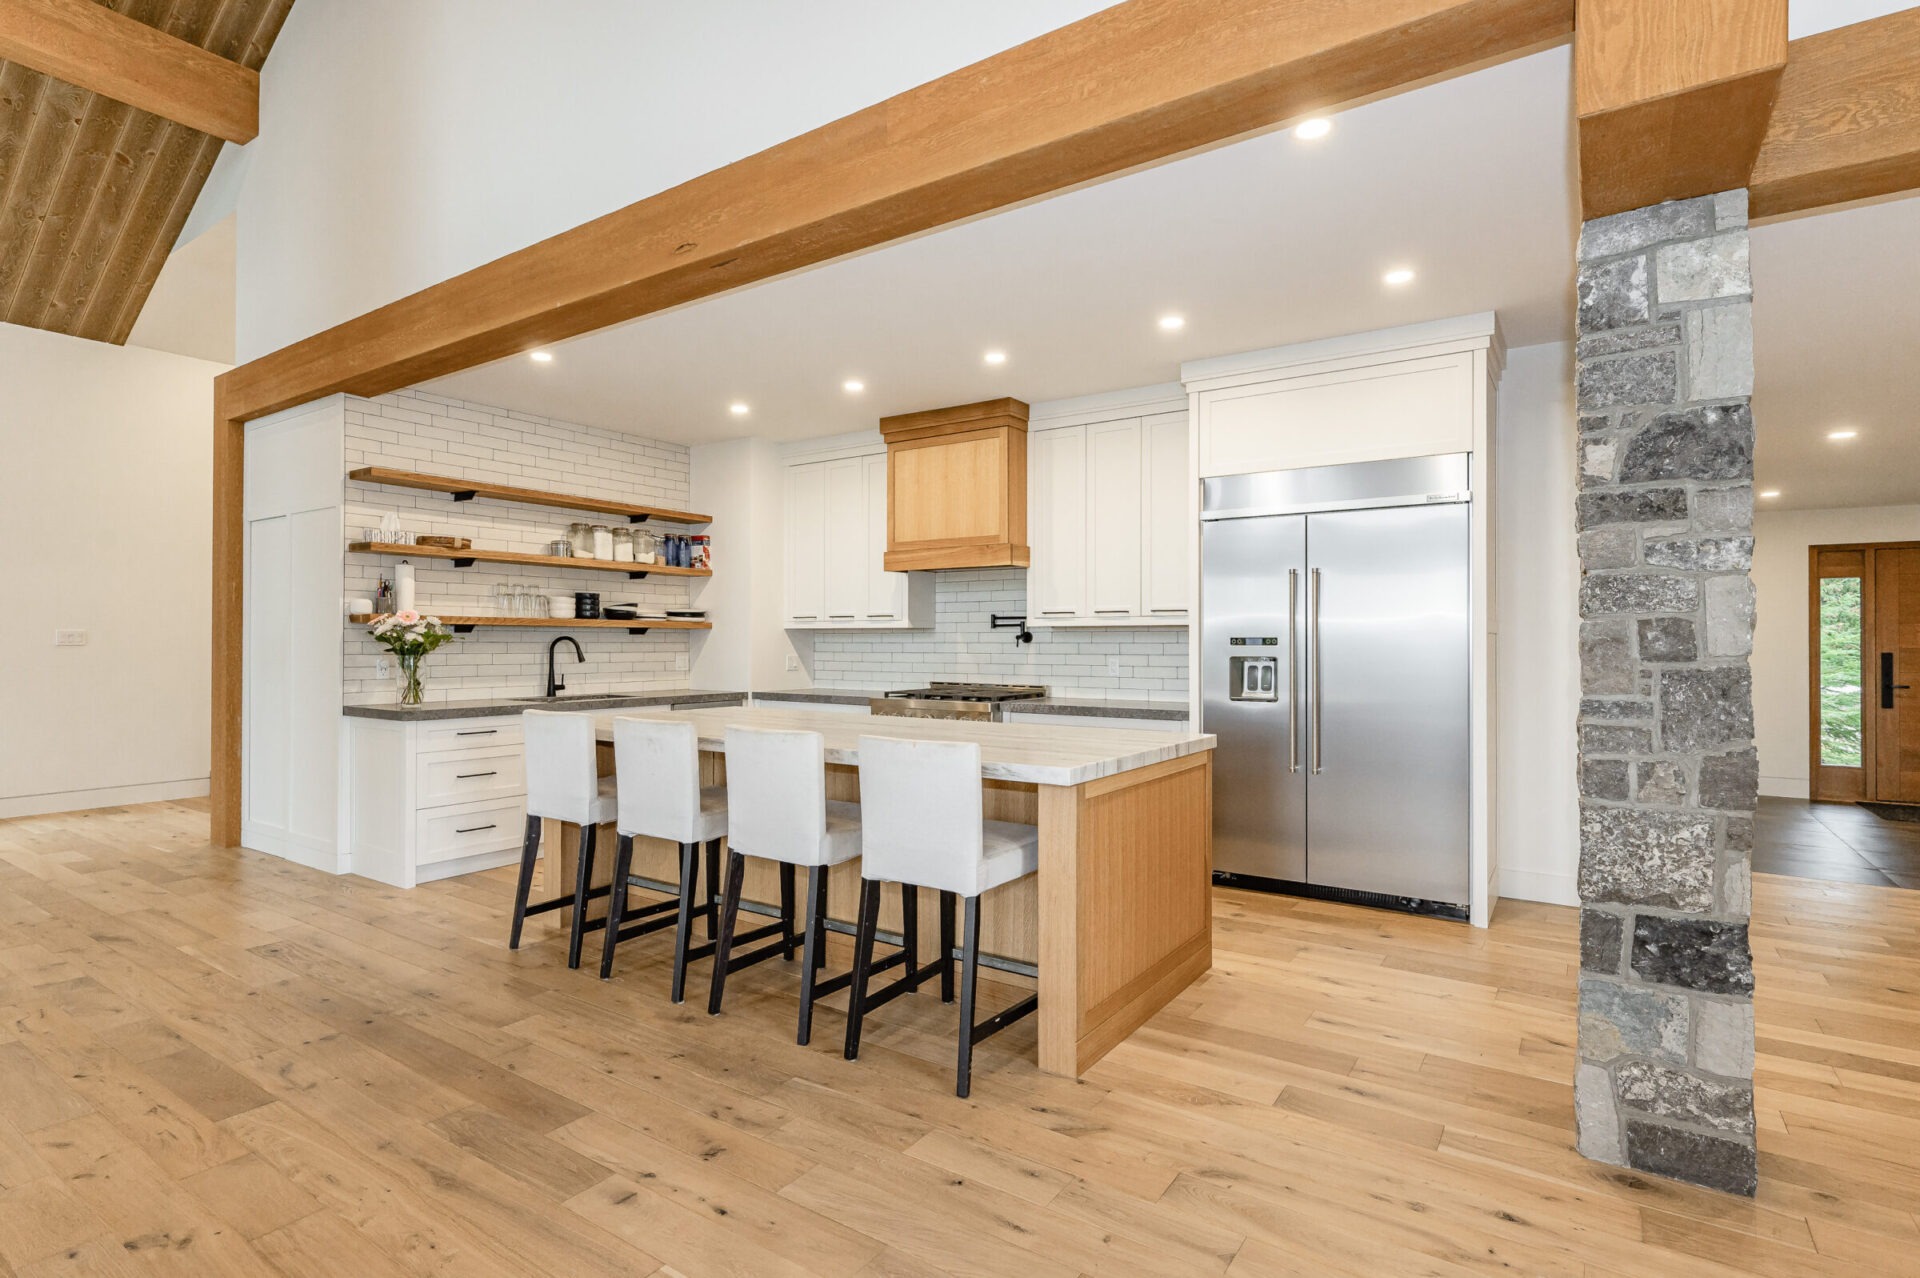 A spacious kitchen with wooden floors, white cabinets, stainless steel appliances, a stone pillar, and a center island with seating. Natural light enhances the warm ambiance.